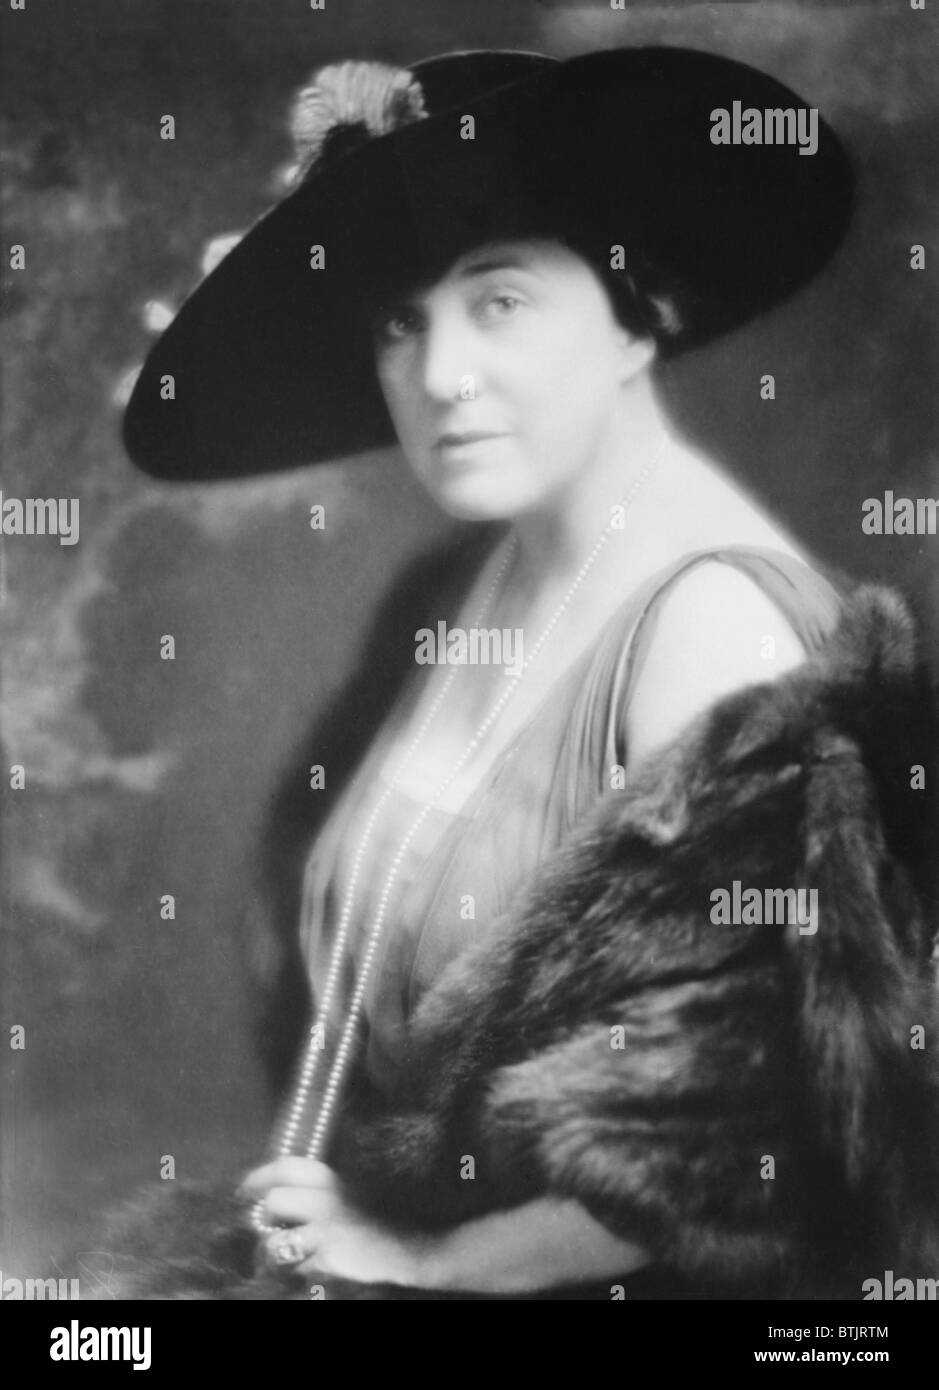 Mary Roberts Rinehart, (1876-1858), popular American novelist and playwright of mystery tales, whose career spanned over 40 years. 1914 studio portrait. Stock Photo